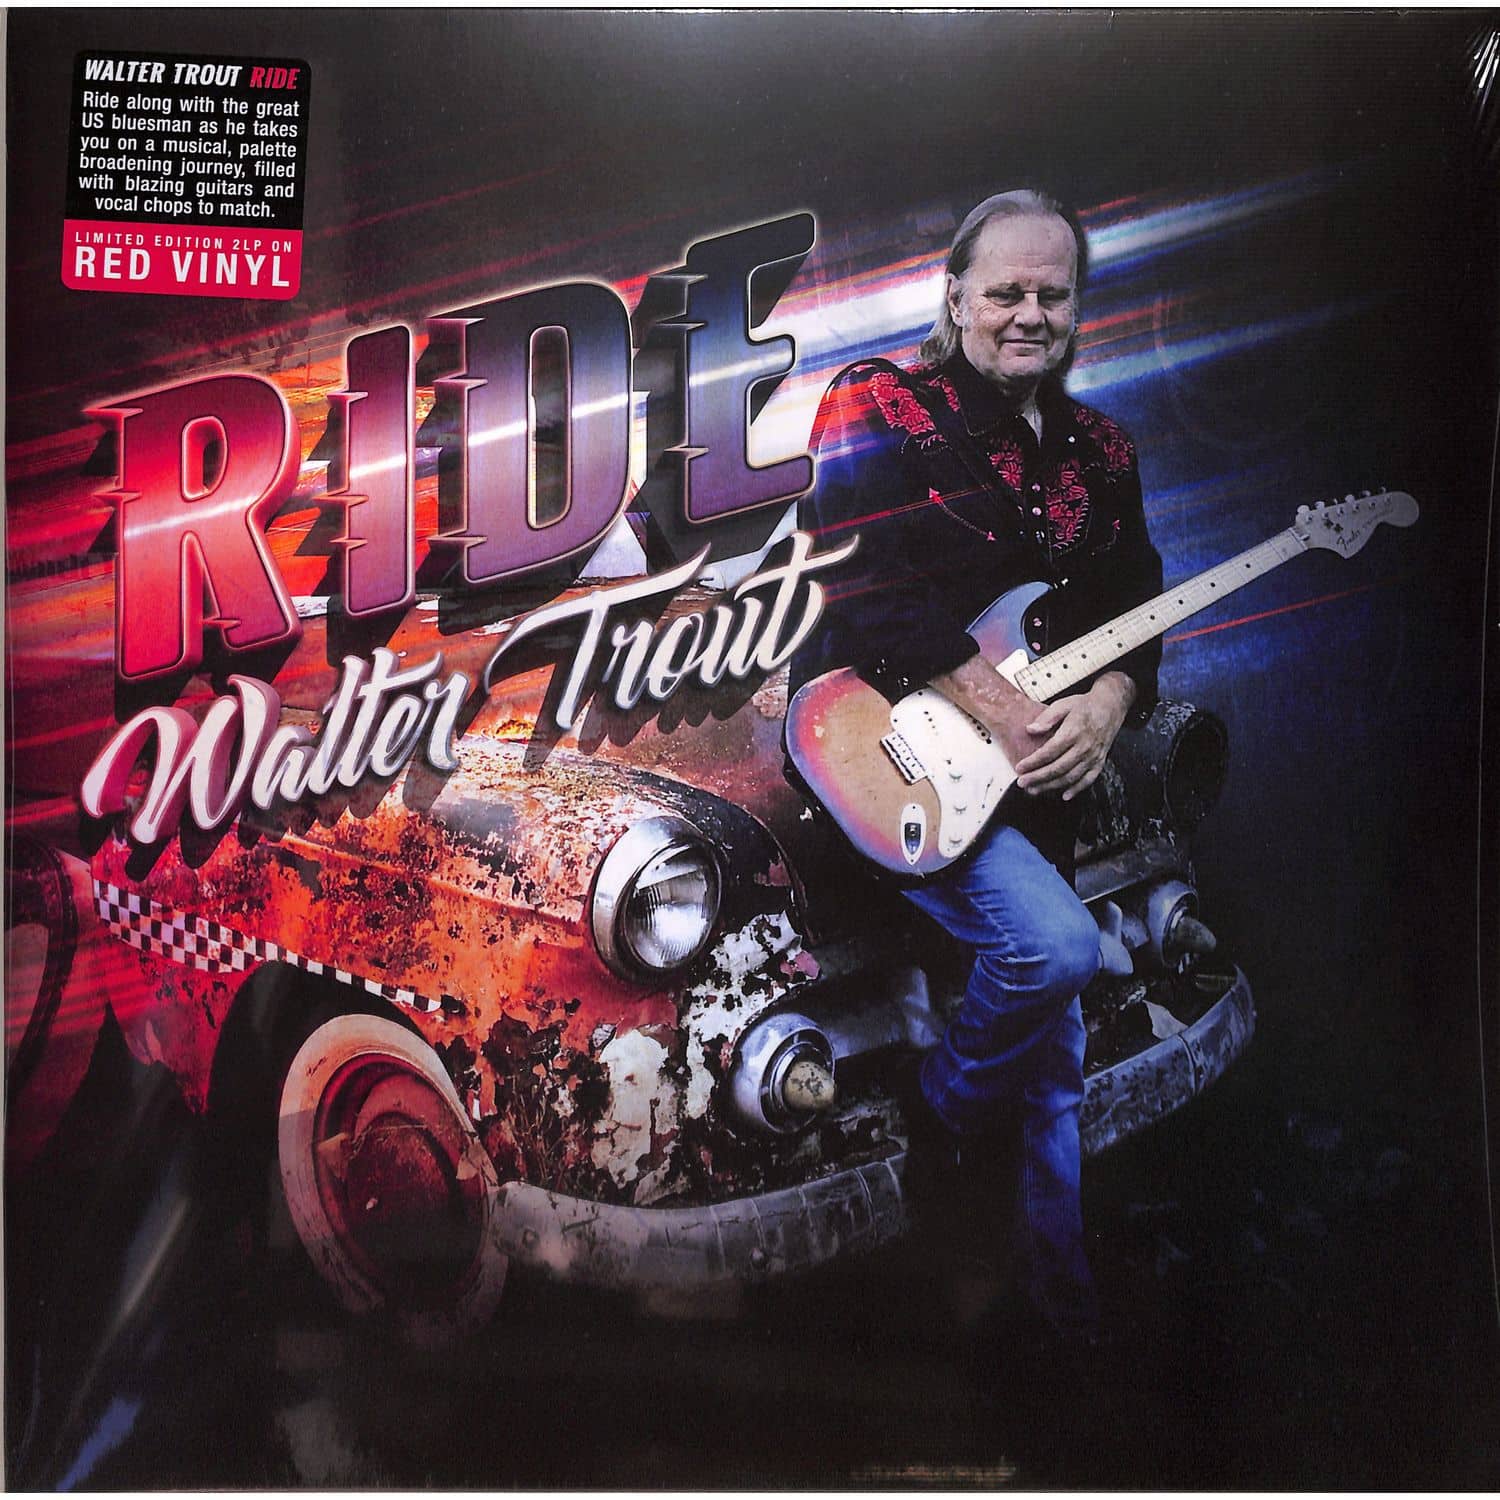 Walter Trout - RIDE 